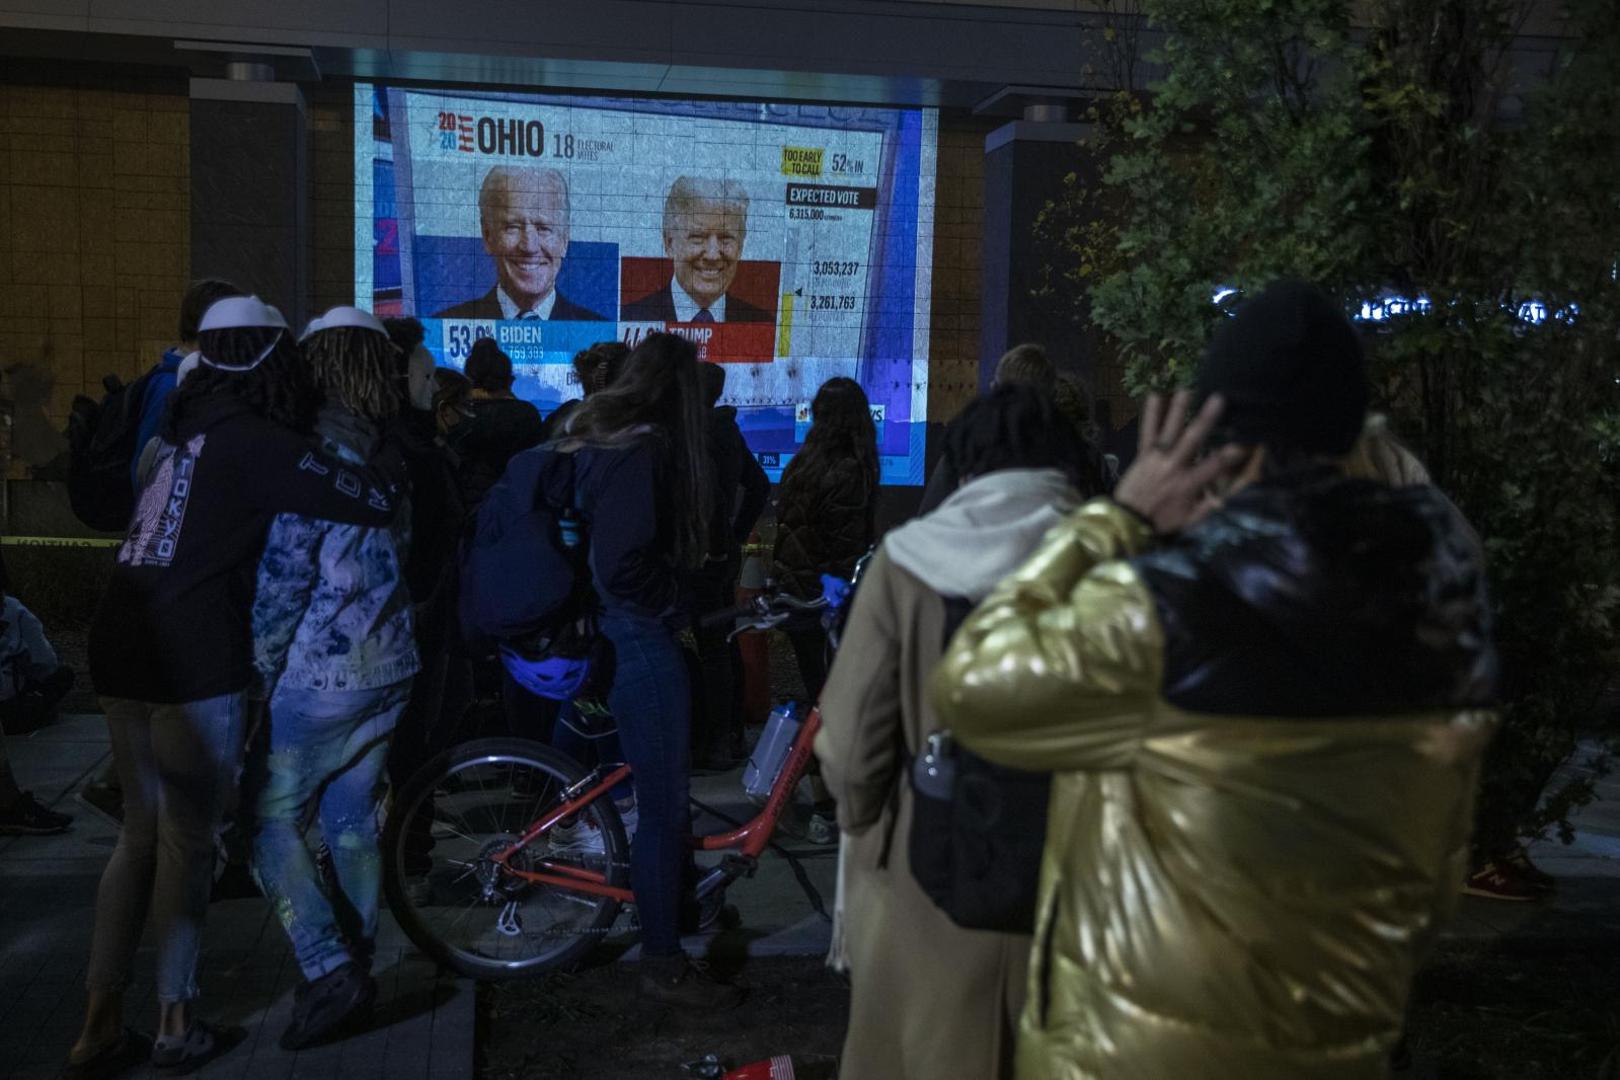 03.11.2020. US Election 2020. Voting day US. Election night in Washington around the White House. Protesters. Watching the election coming in on a screen.  

Material must be credited "The Times/News Licensing" unless otherwise agreed. 100% surcharge if not credited. Online rights need to be cleared separately. Strictly one time use only subject to agreement with News Licensing Photo: News Syndication/PIXSELLPhoto: NI Syndication/PIXSELL